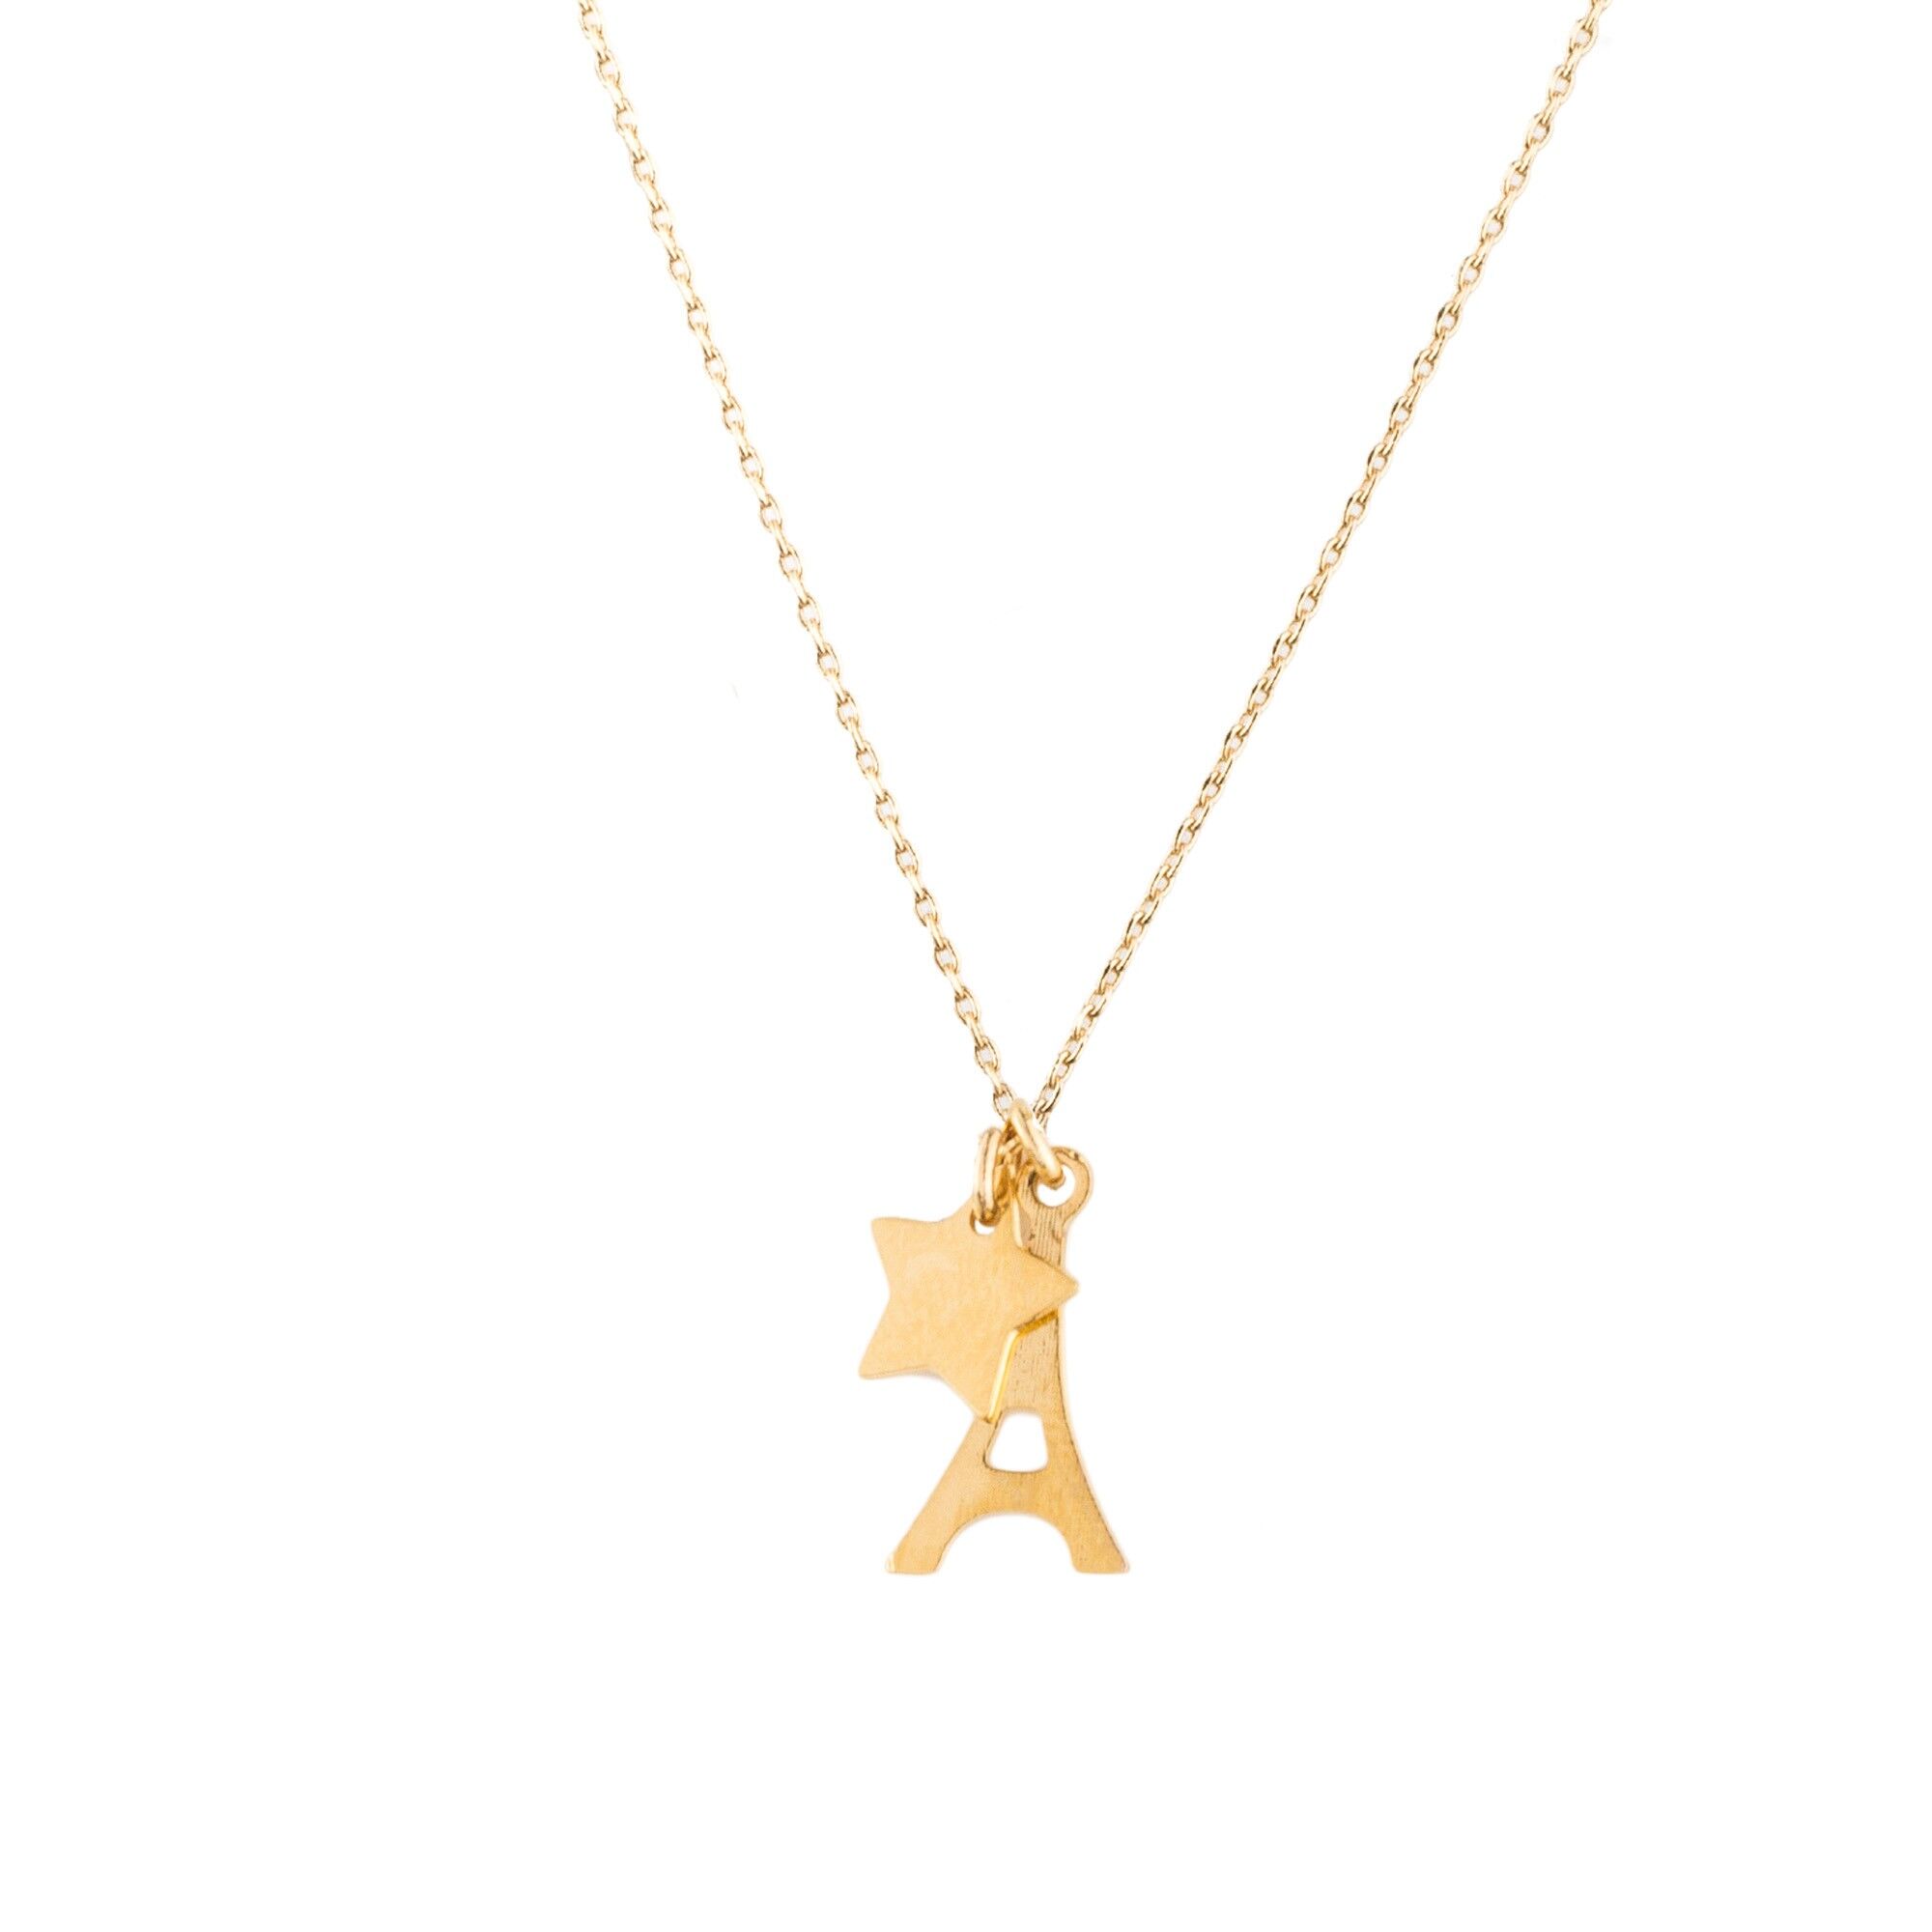 Delicate and Adorable Necklaces That Will Steal Your Heart